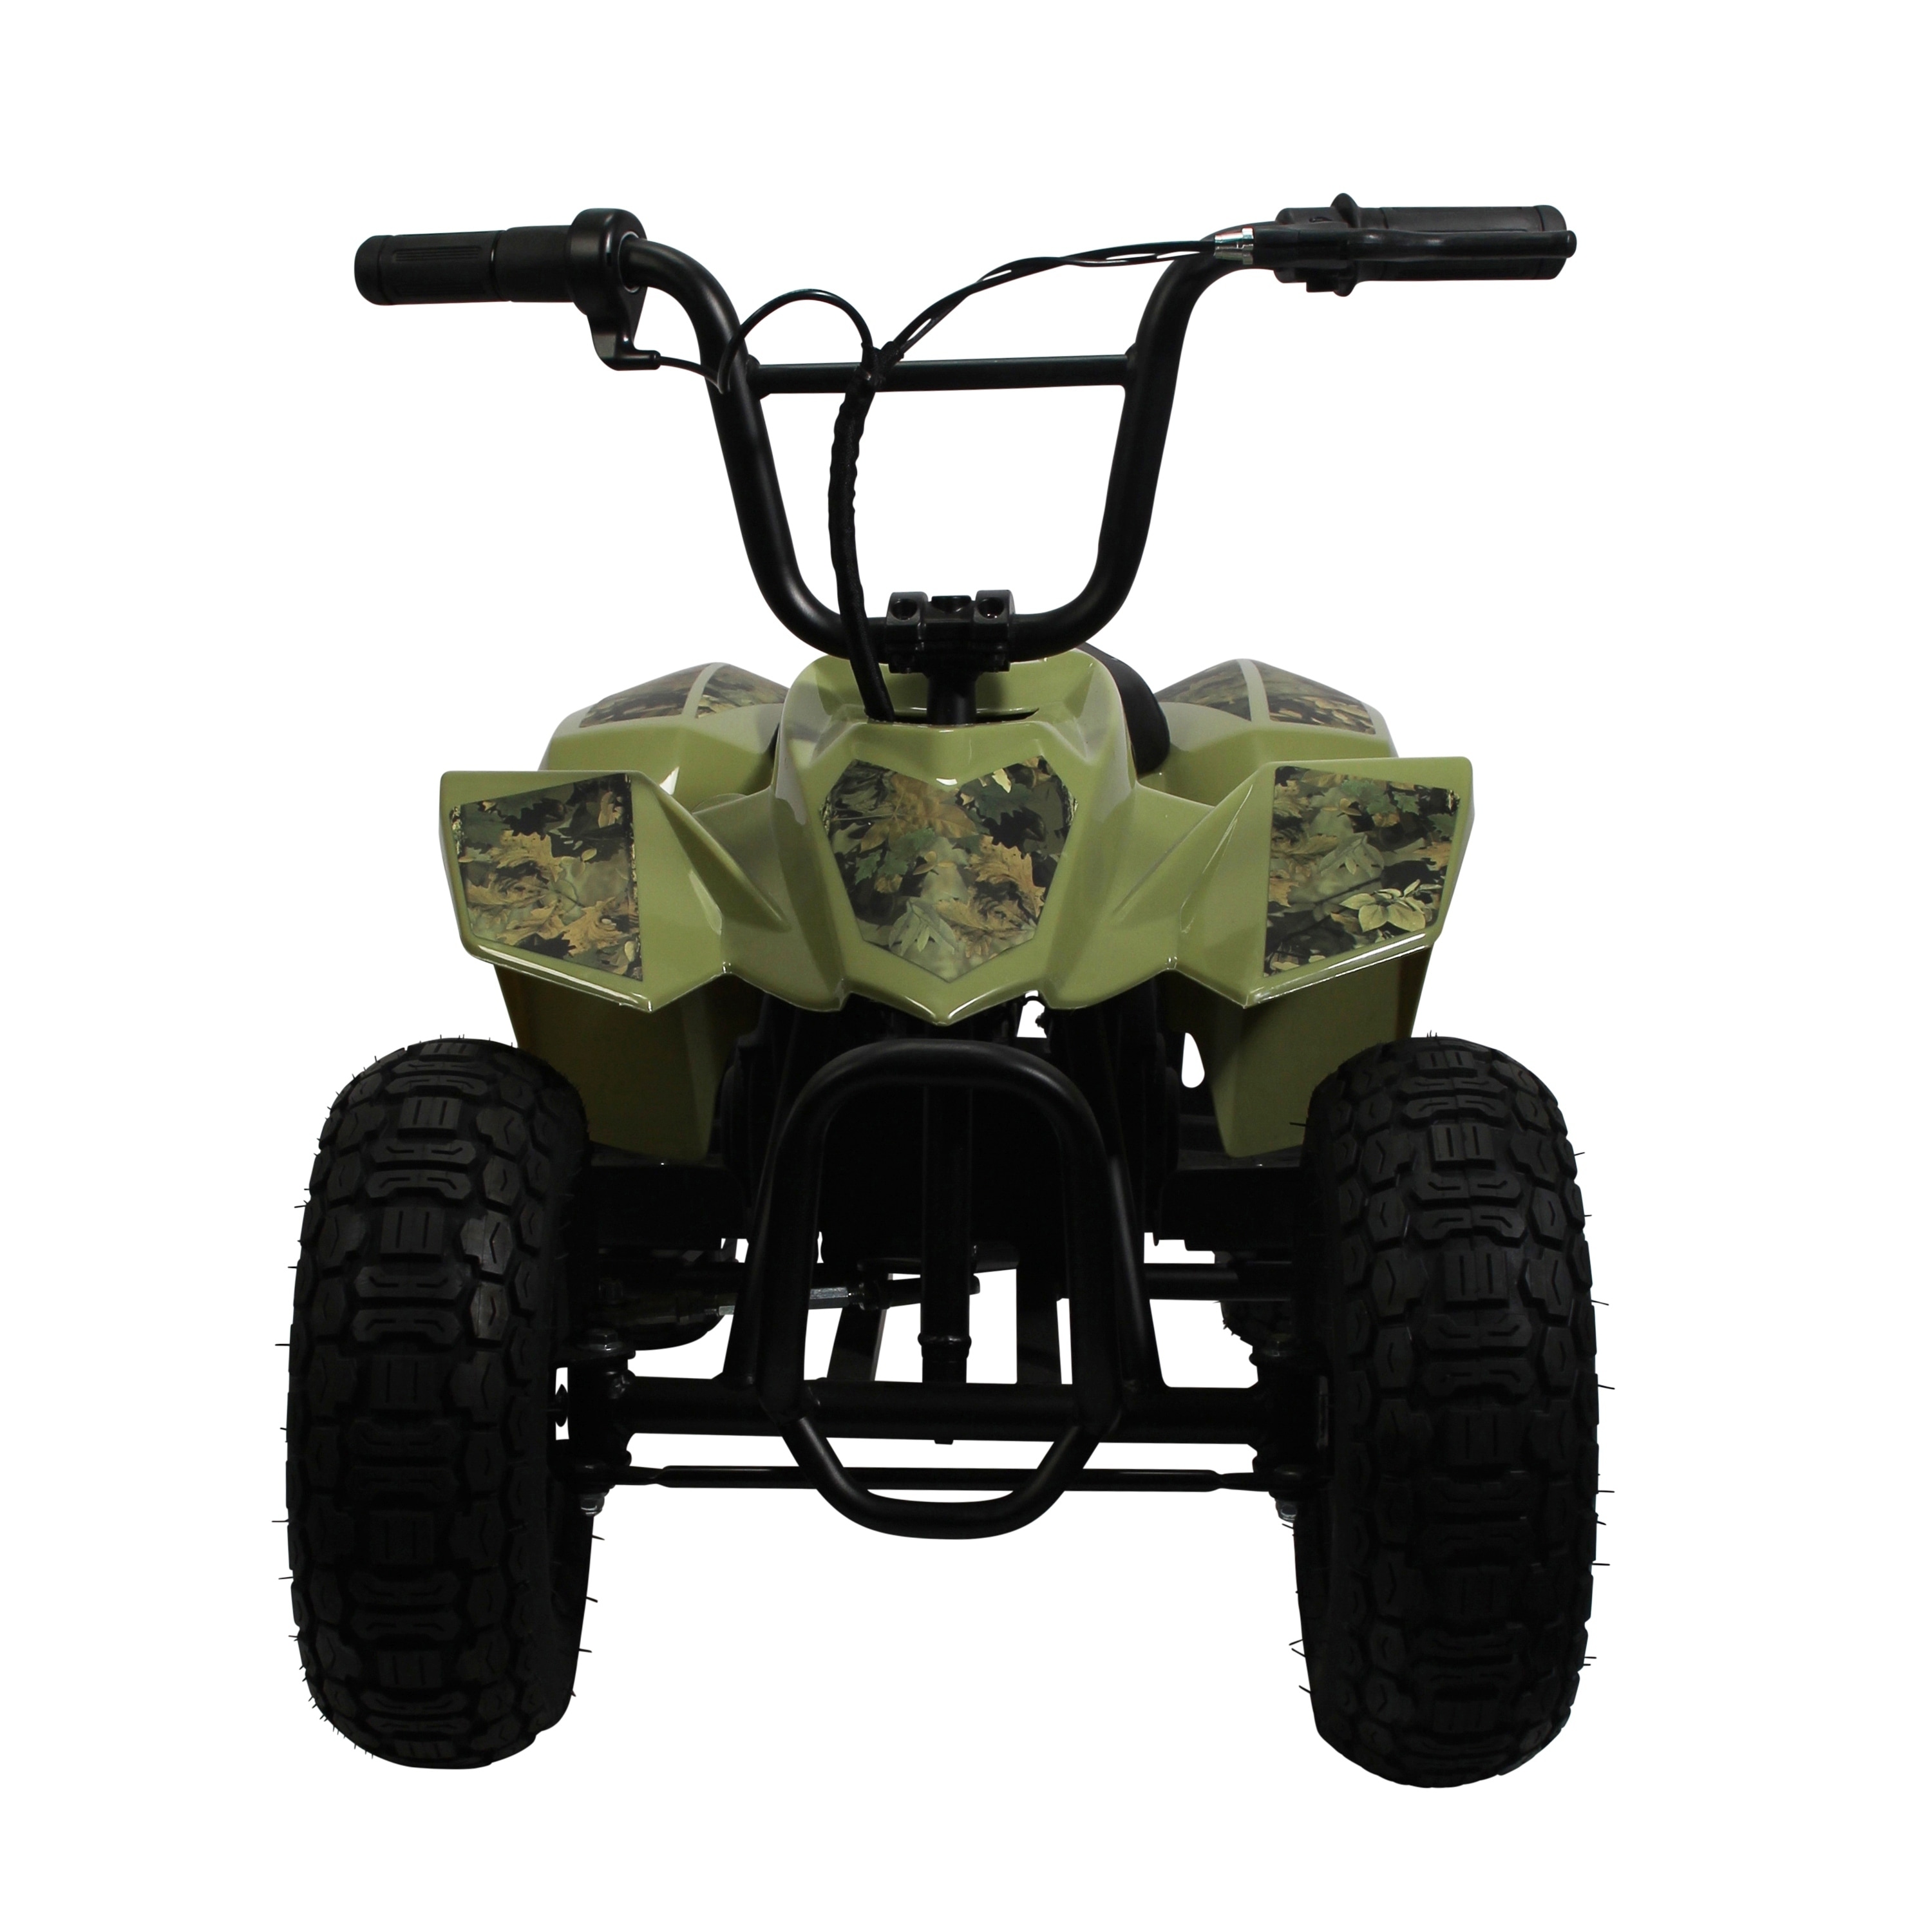 pulse performance products atv quad battery powered riding toy